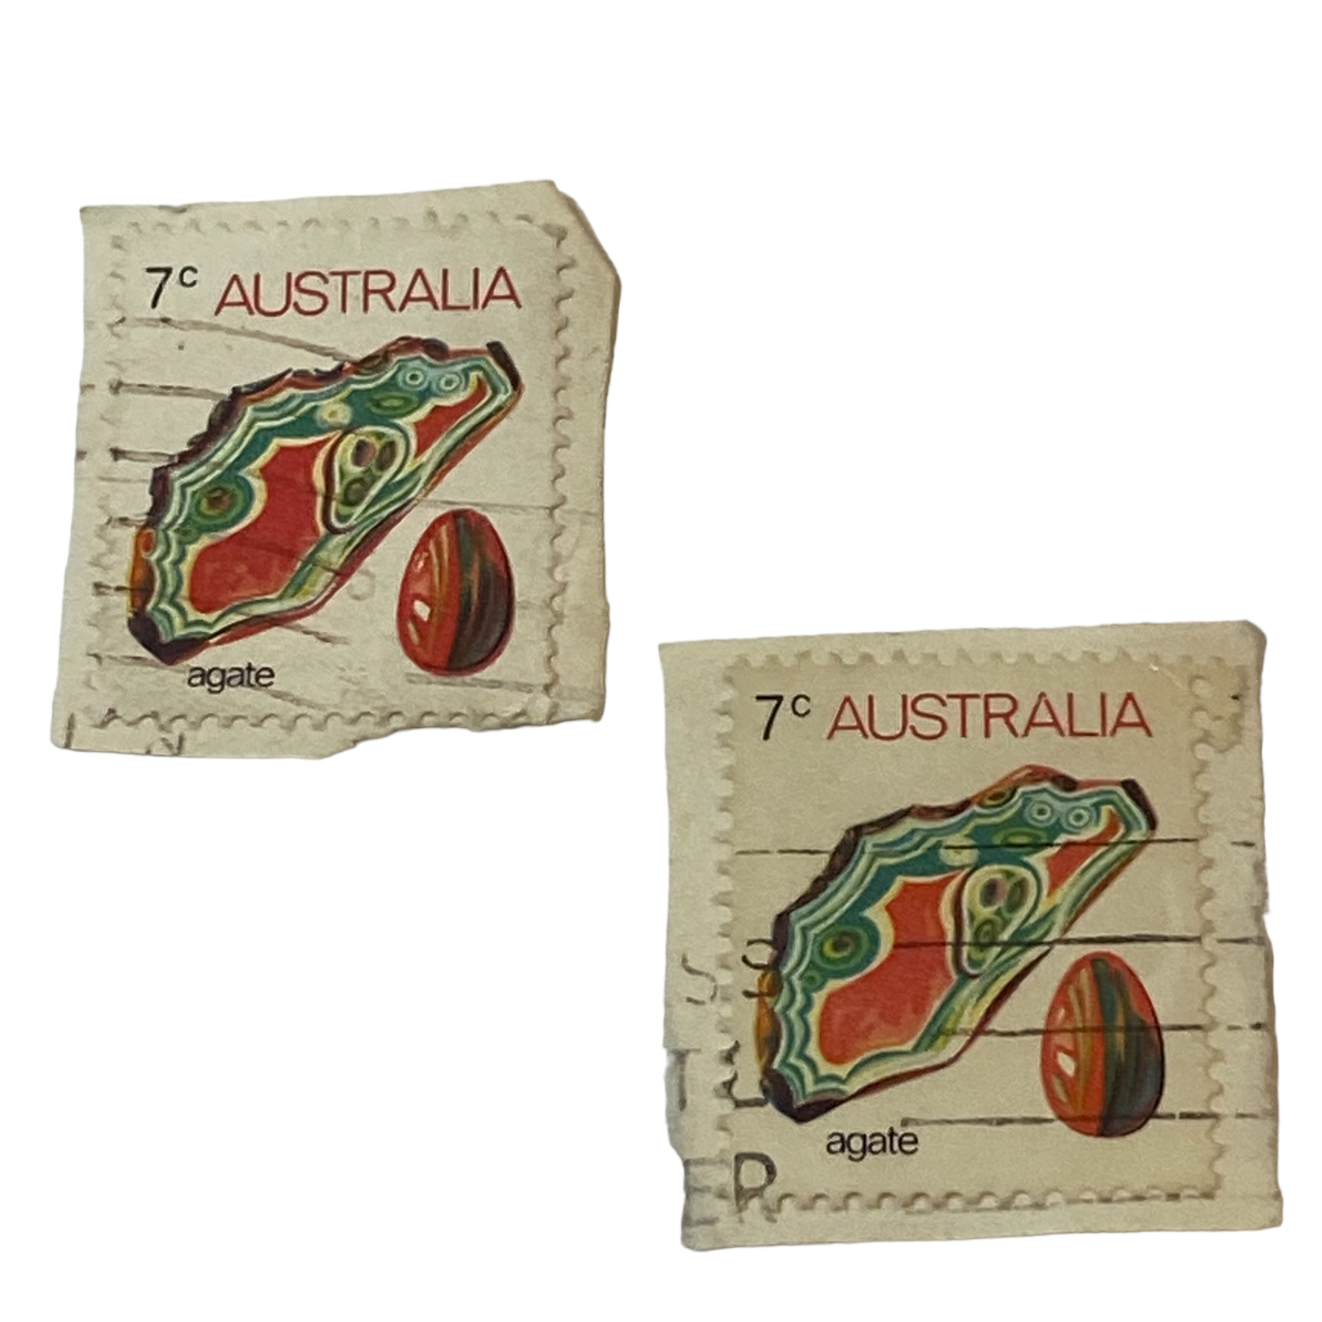 Primary image for Australia Stamp 7c Agate Issued 1973 Machine Canceled Ungraded Lot of 2